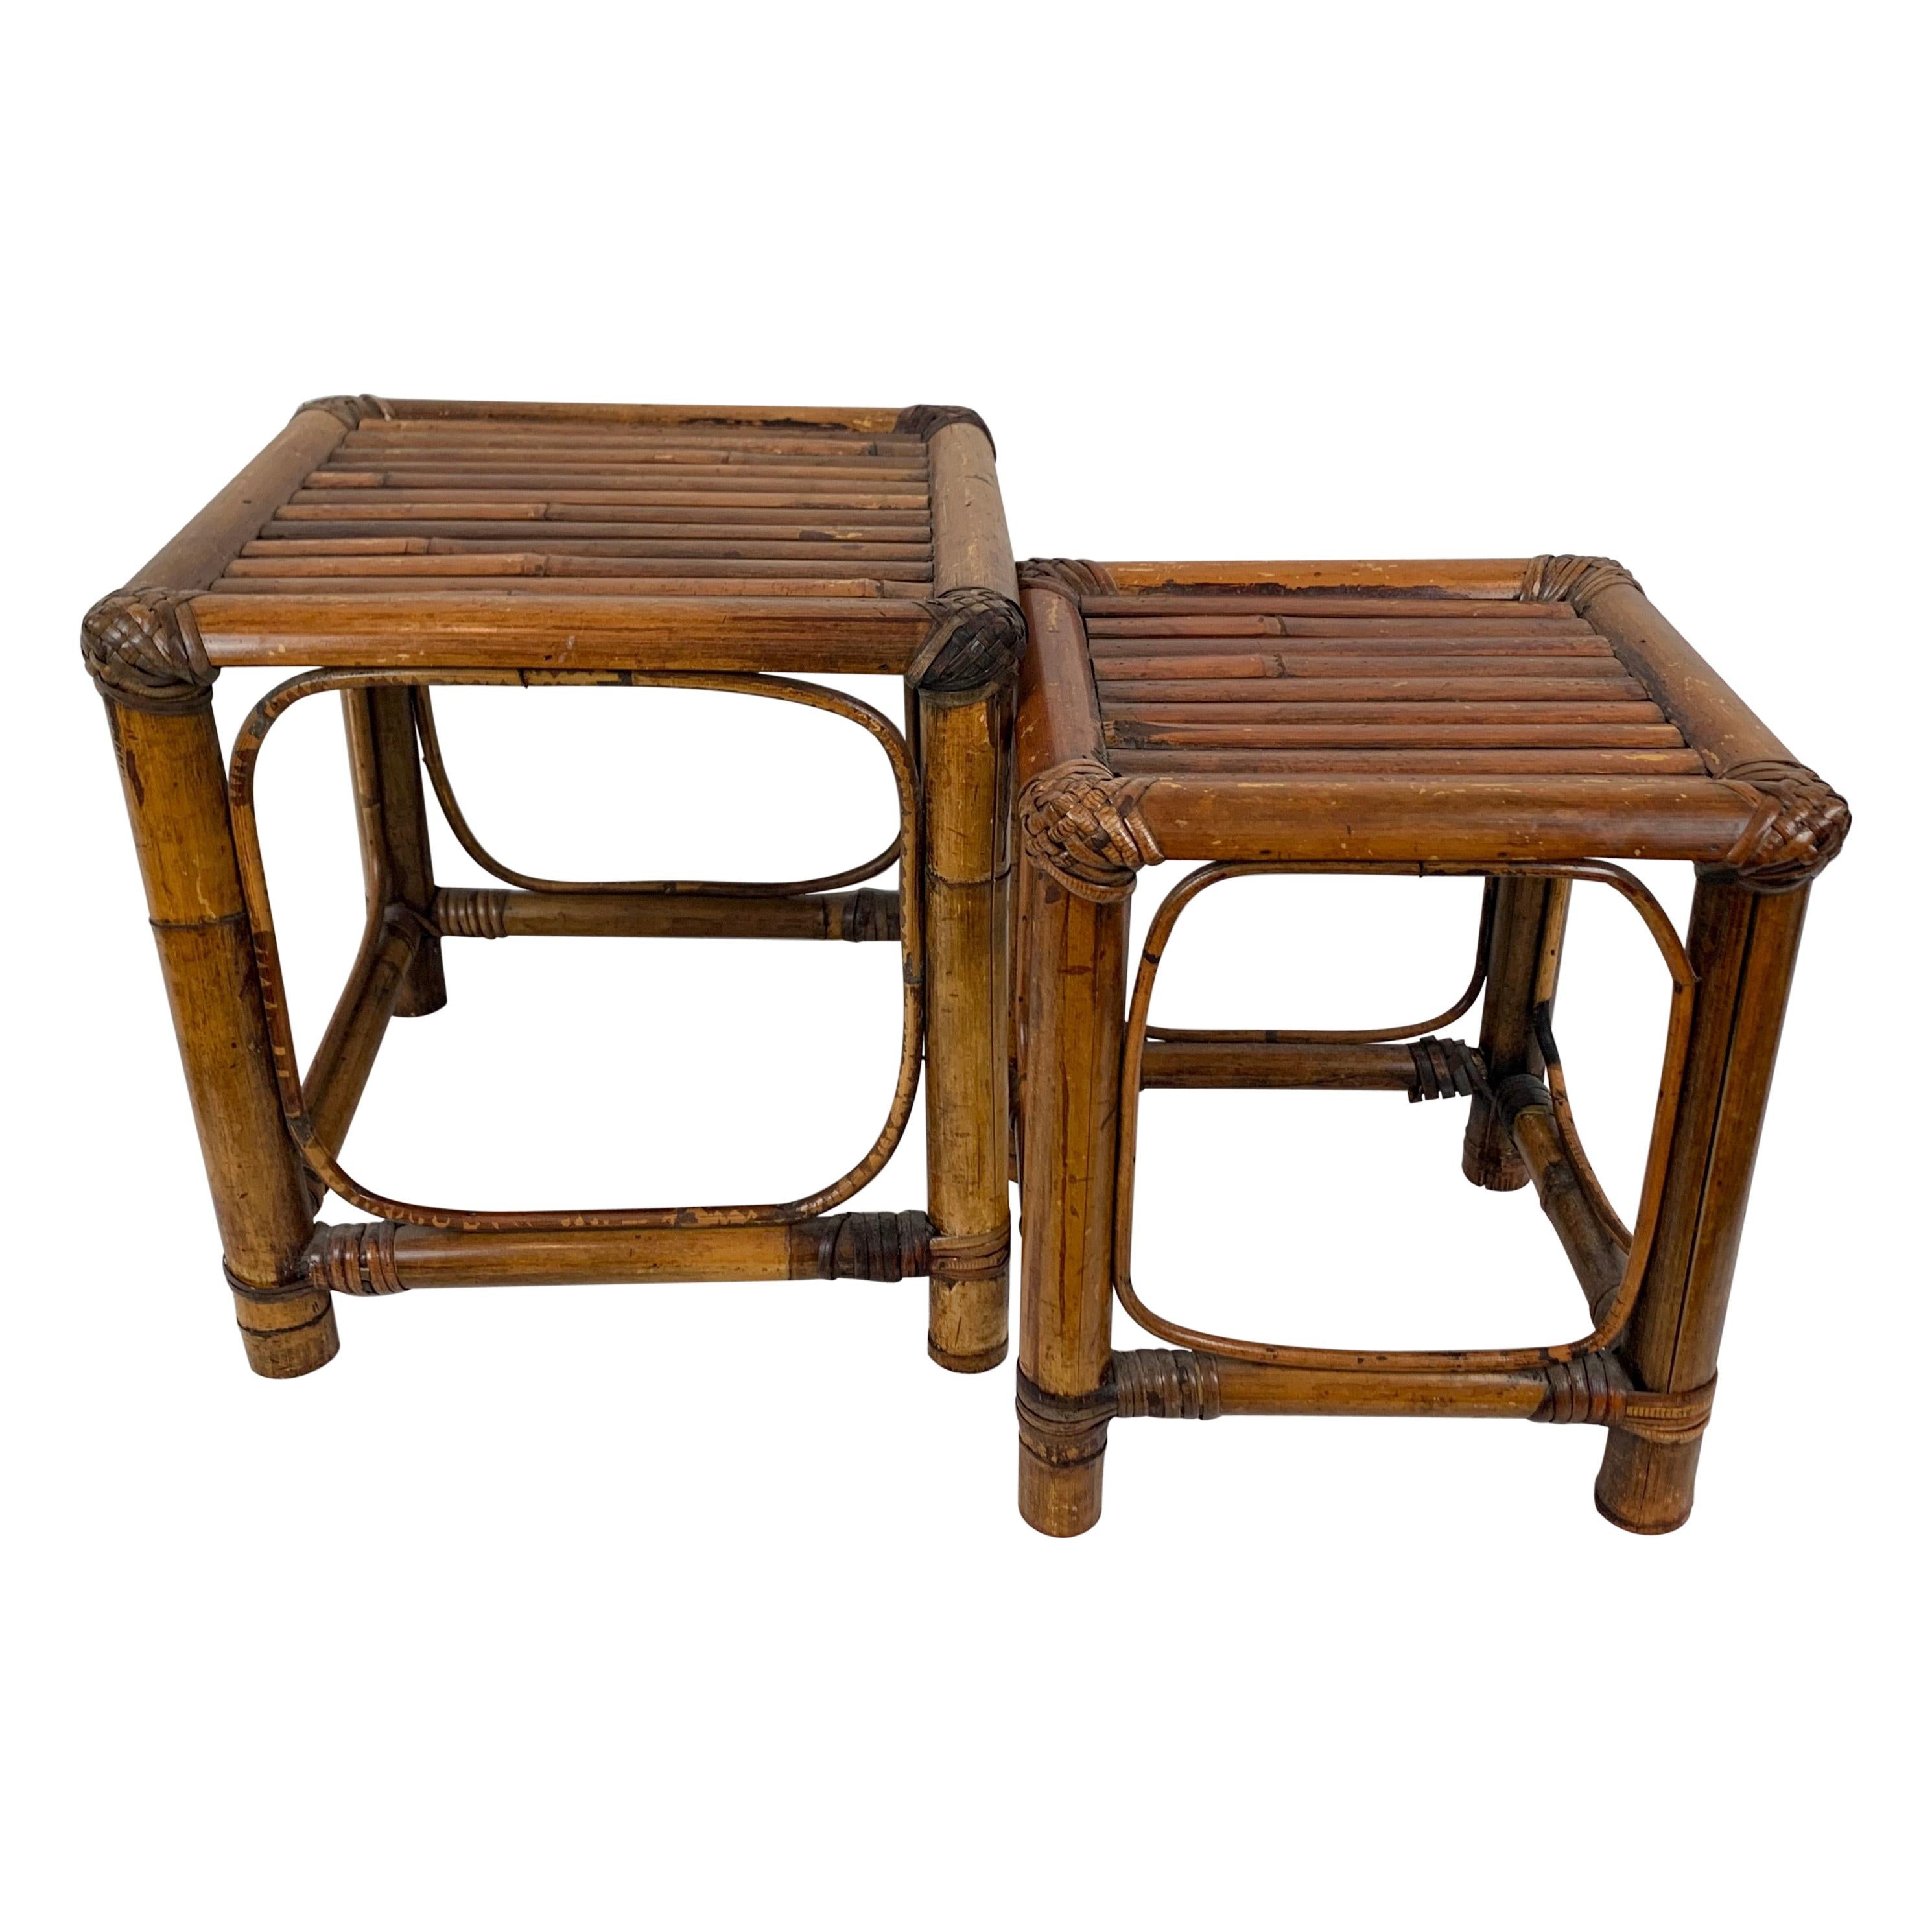 Set of Two Stacking Bamboo Tables with Added Beveled Glass Tops